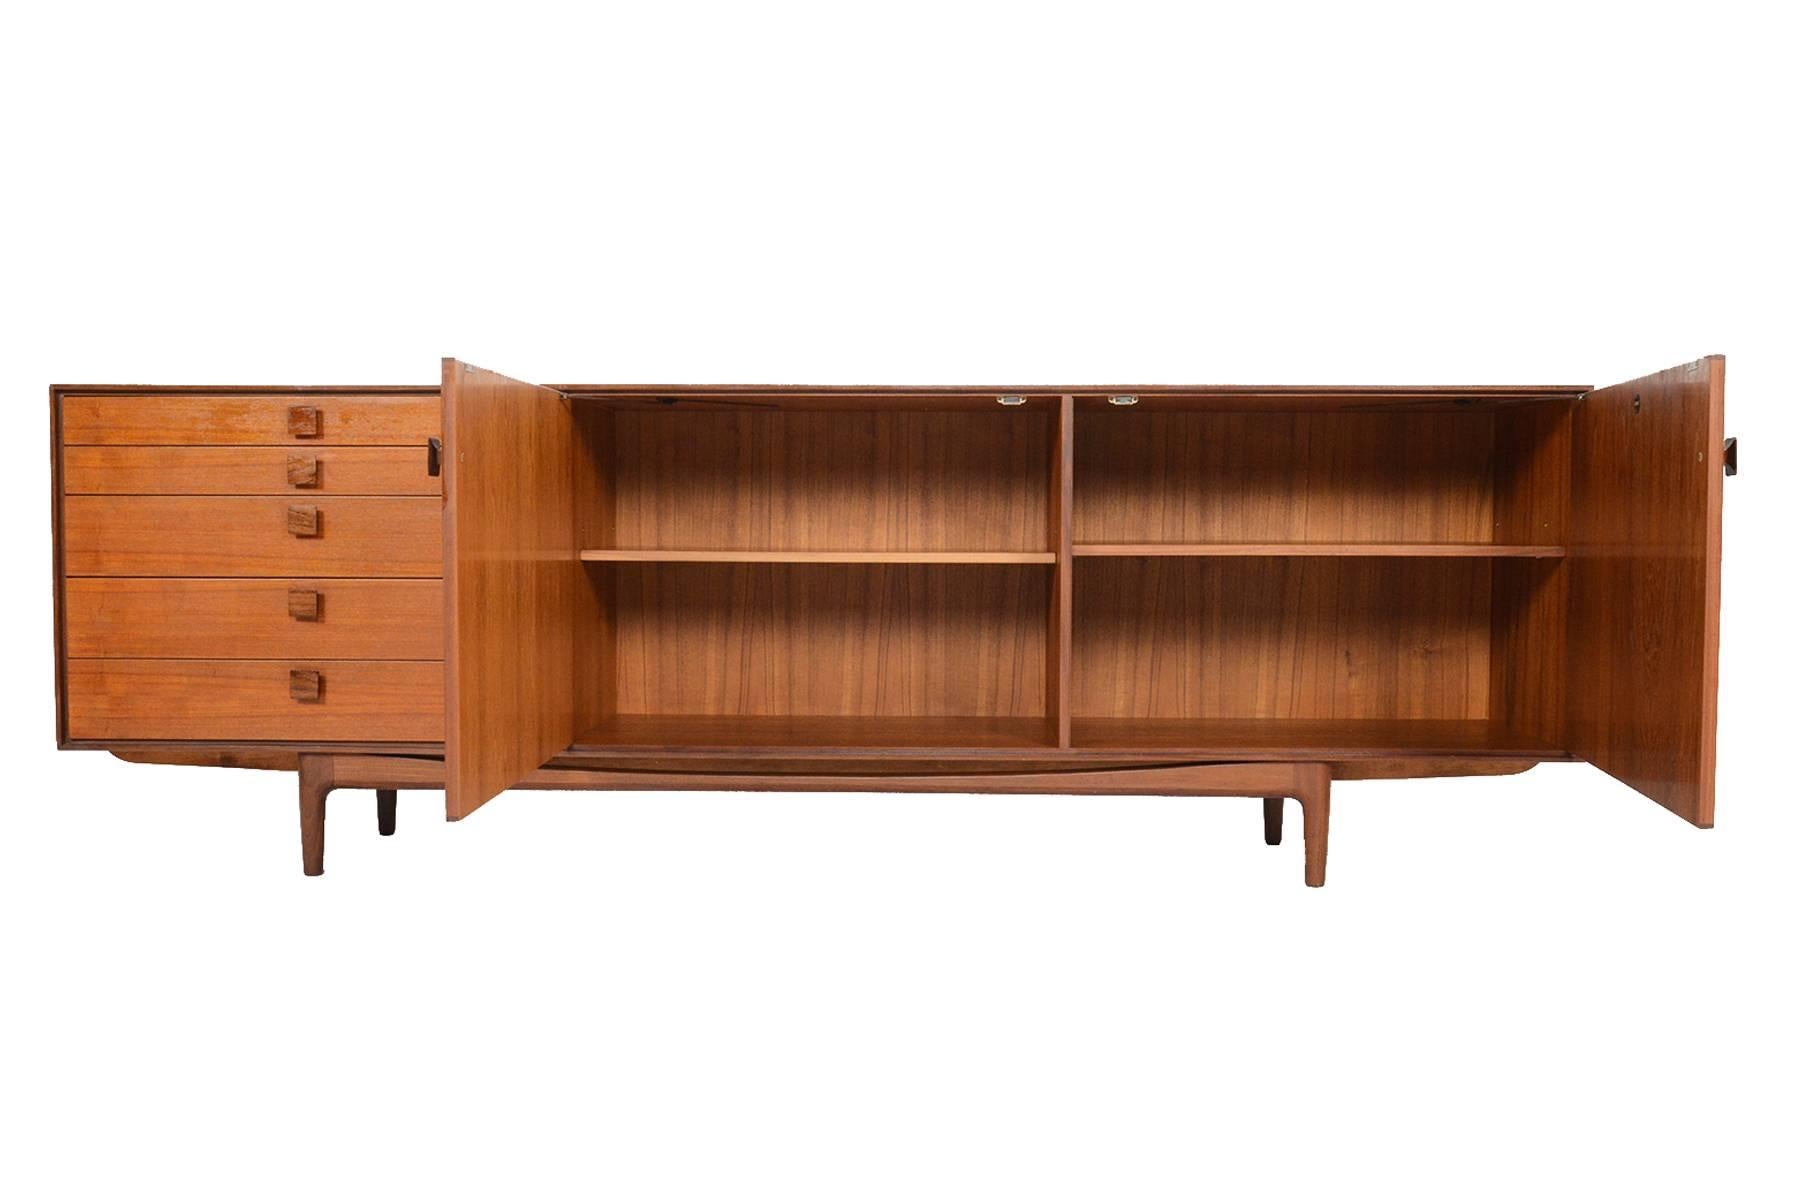 This Danish modern Mid-Century large teak credenza was designed by Ib Kofod- Larsen for Grange and Branches in the 1960s. Crafted in teak with handsomely refined lines, five drawers with the designer's signature carved teak pulls sit on the left of